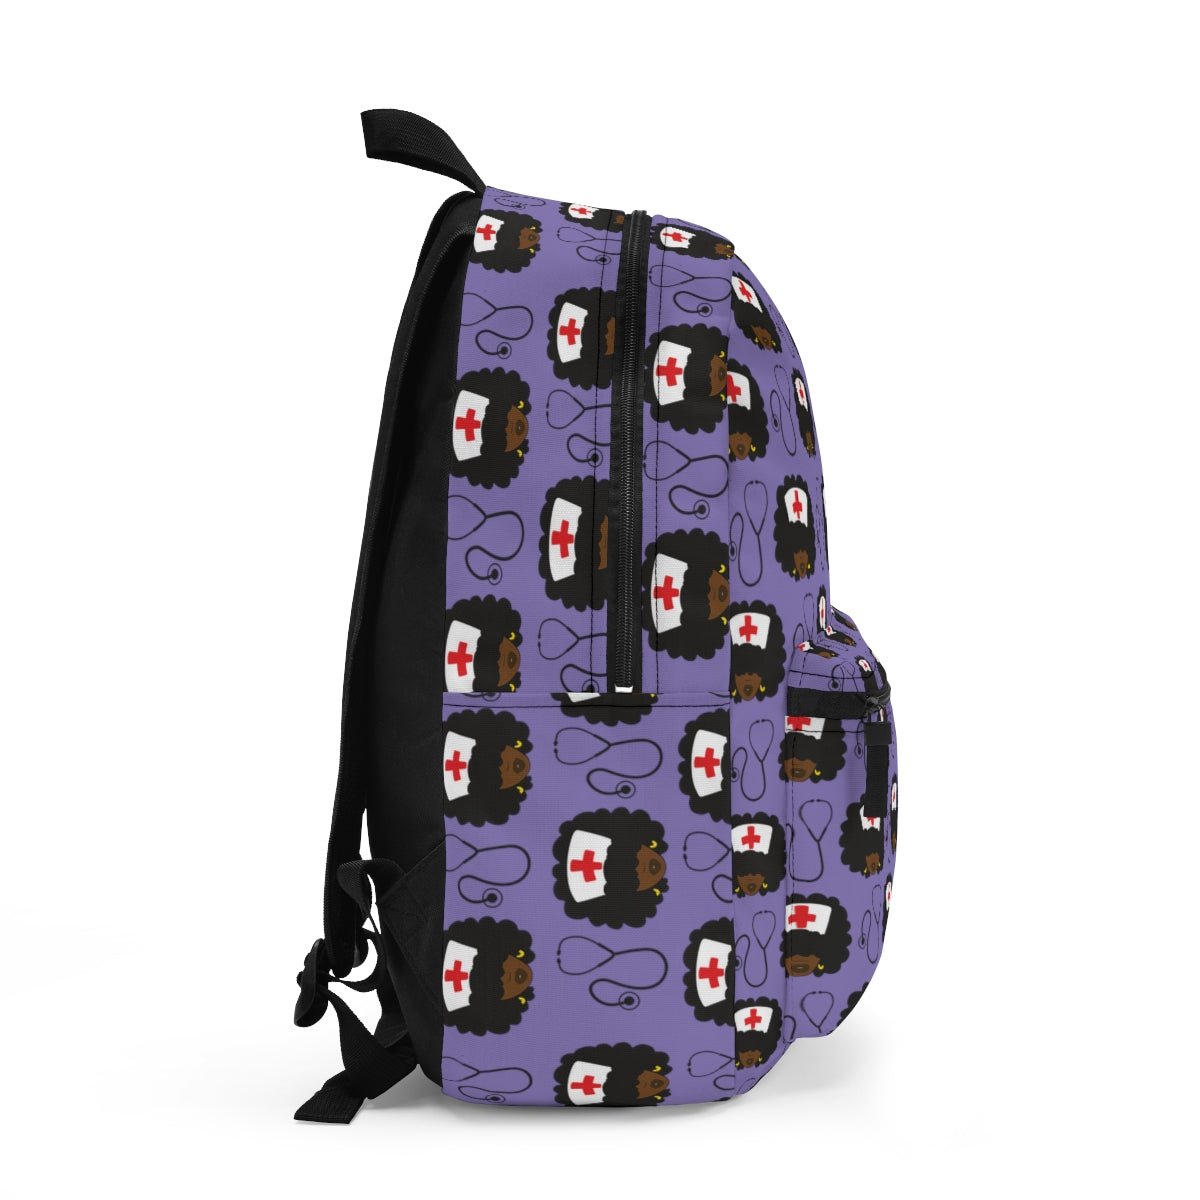 Afro Nurse Backpack - The Trini Gee